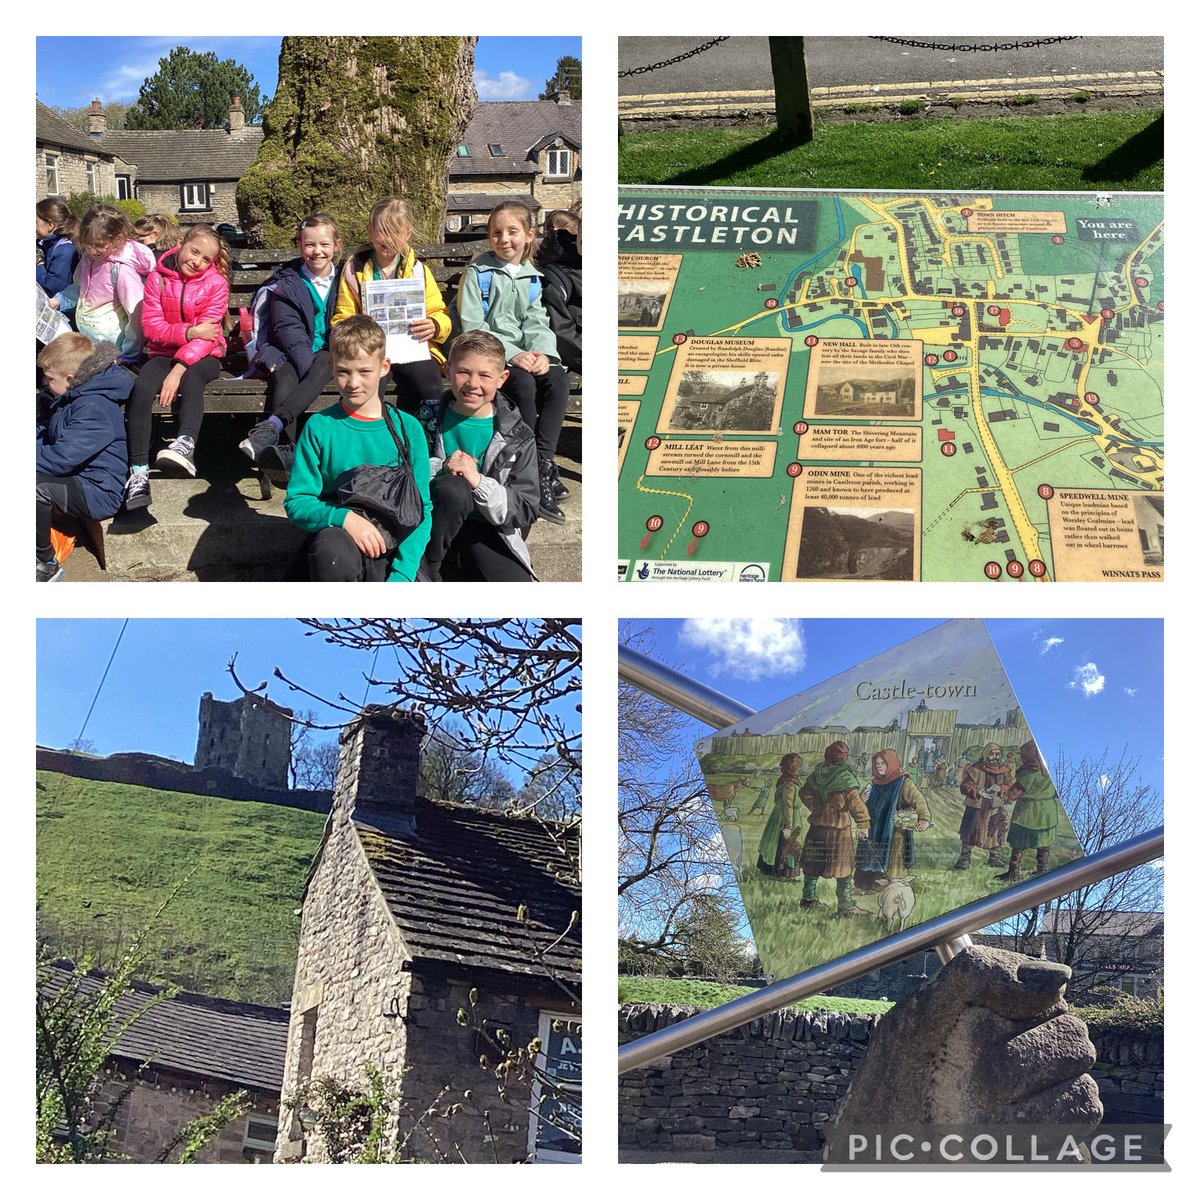 A few photos from Year 3 Castleton trip. A few tired children at the end of the day. @jmatschools